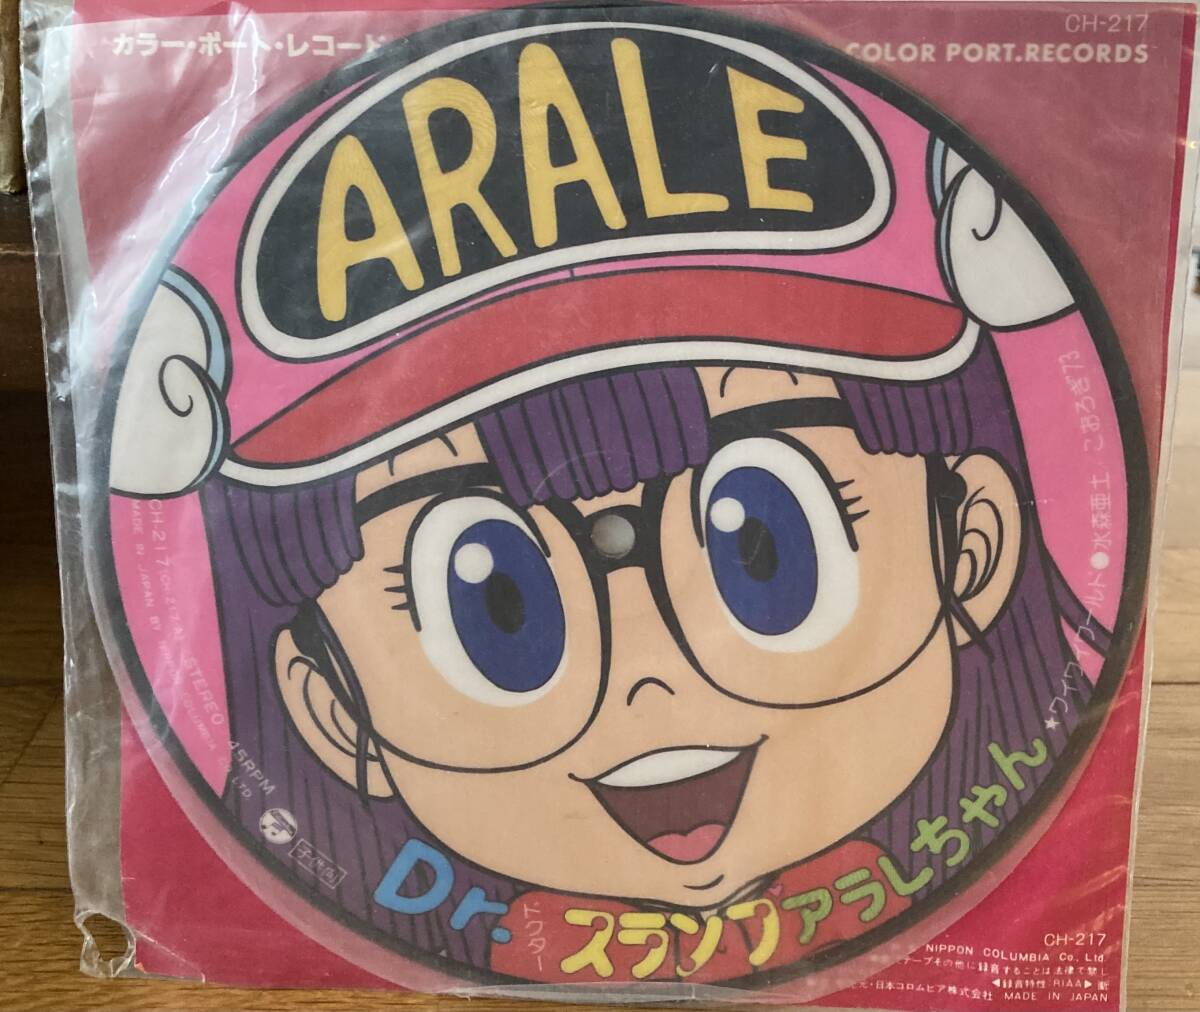 Dr. slump Arale-chan waiwai world Picture record 7inc analogue record water forest . earth 